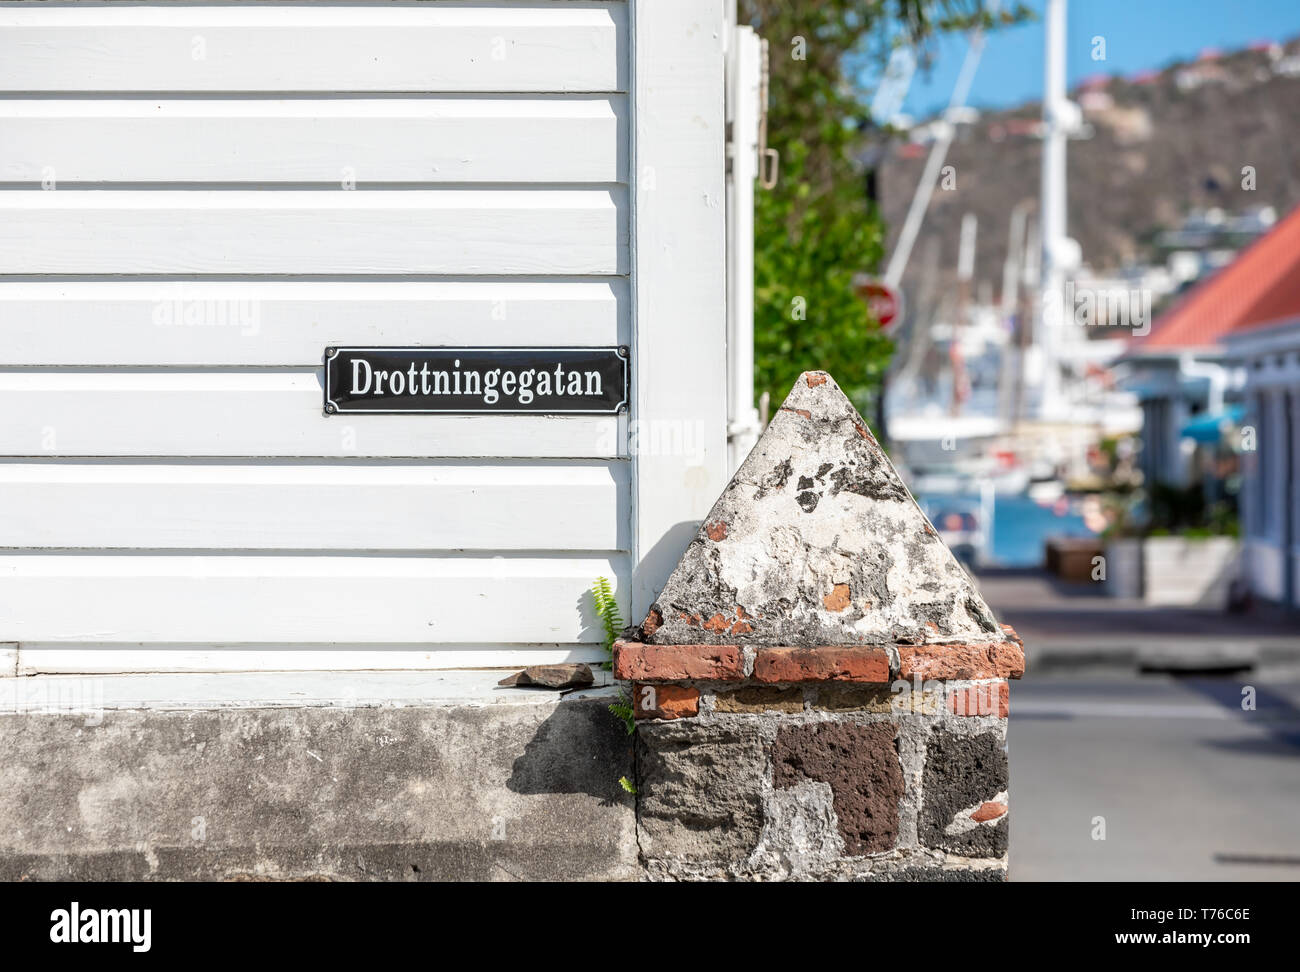 Street sign at a street corner in Gustavia, St Barts Stock Photo